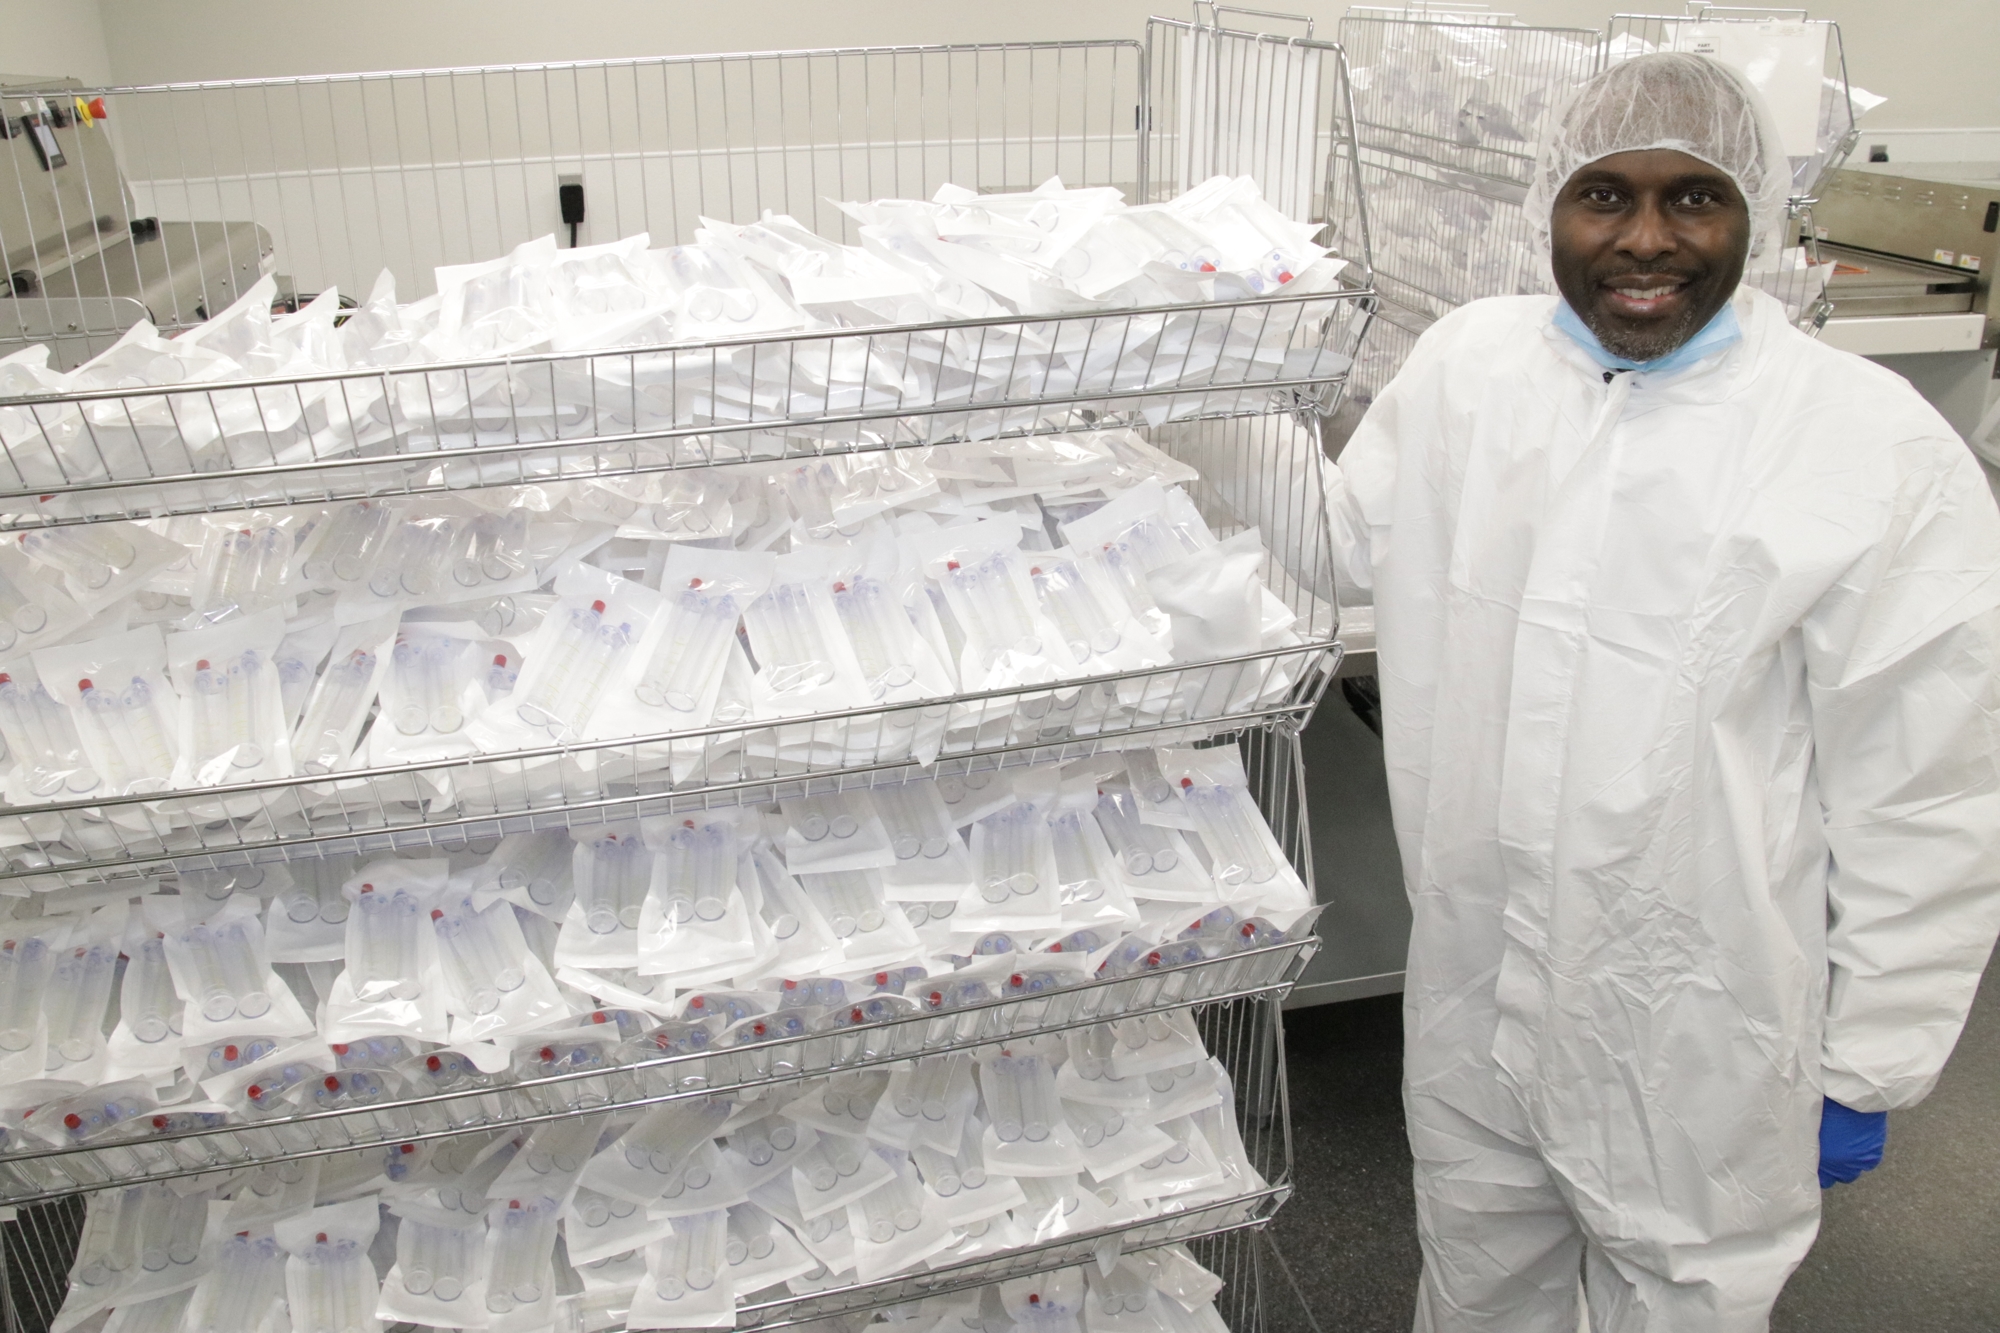 Emcyte Chairman and CEO Patrick Pennie in the clean room some some of the thousands of PRP treatment kits the company manufactures daily. Photo by JimJett.com